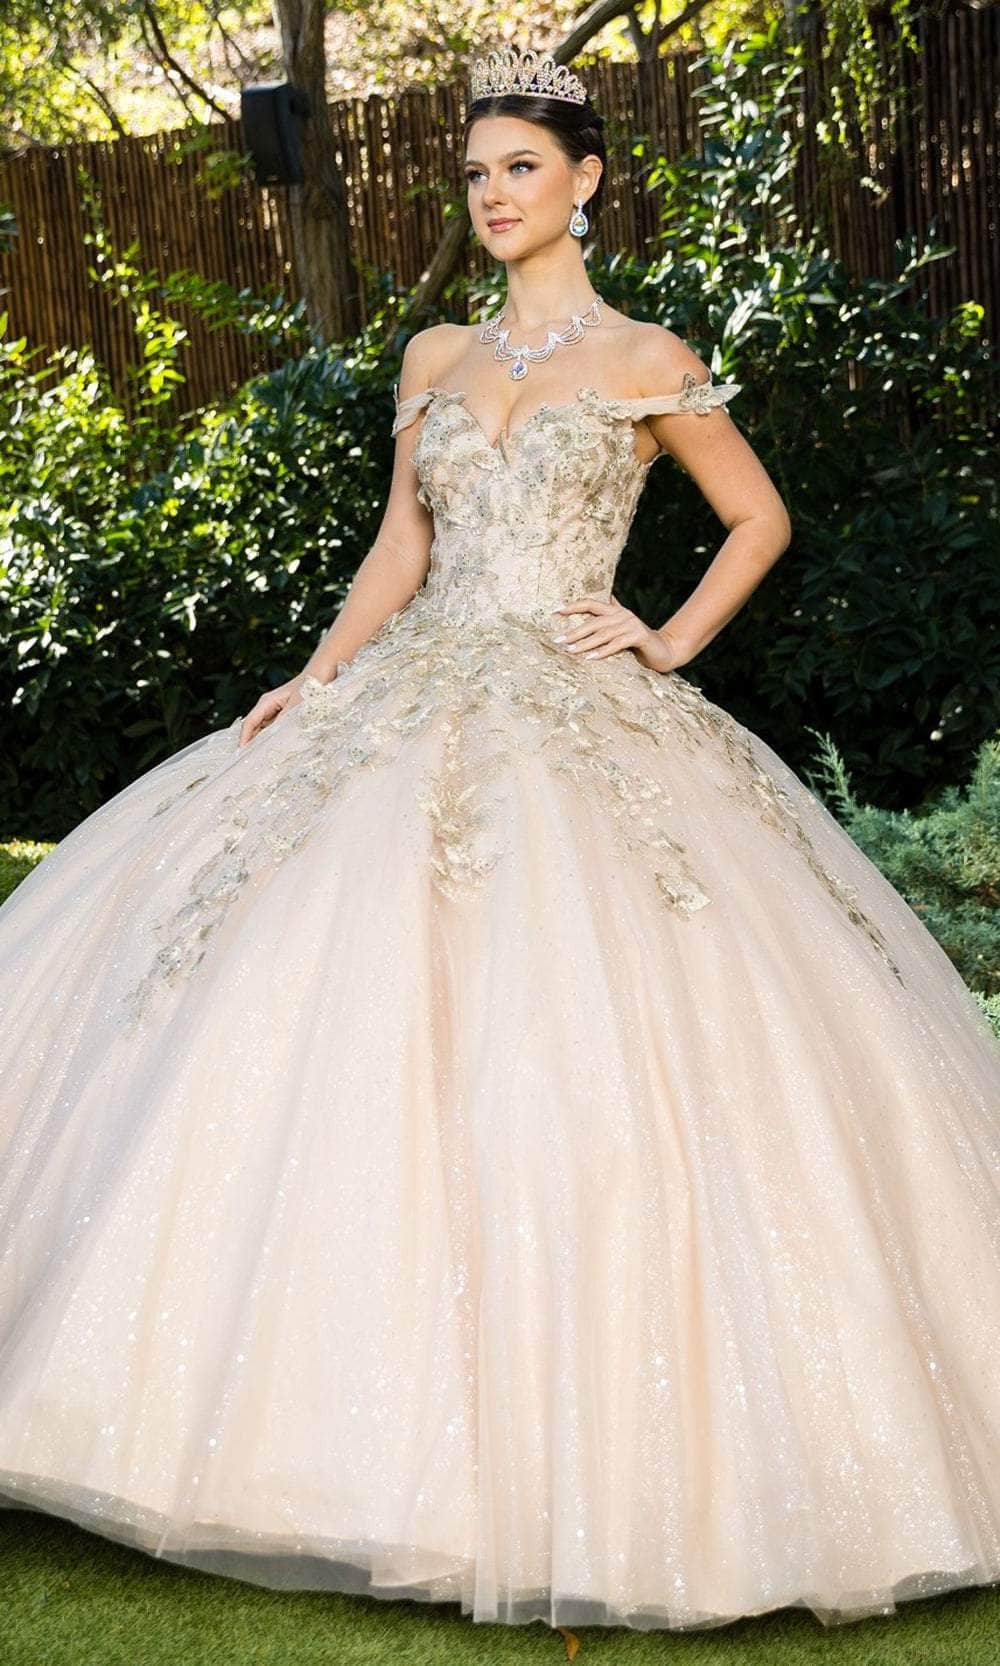 Cinderella Couture 8046J - Butterfly Embroidered Ballgown Special Occasion Dress